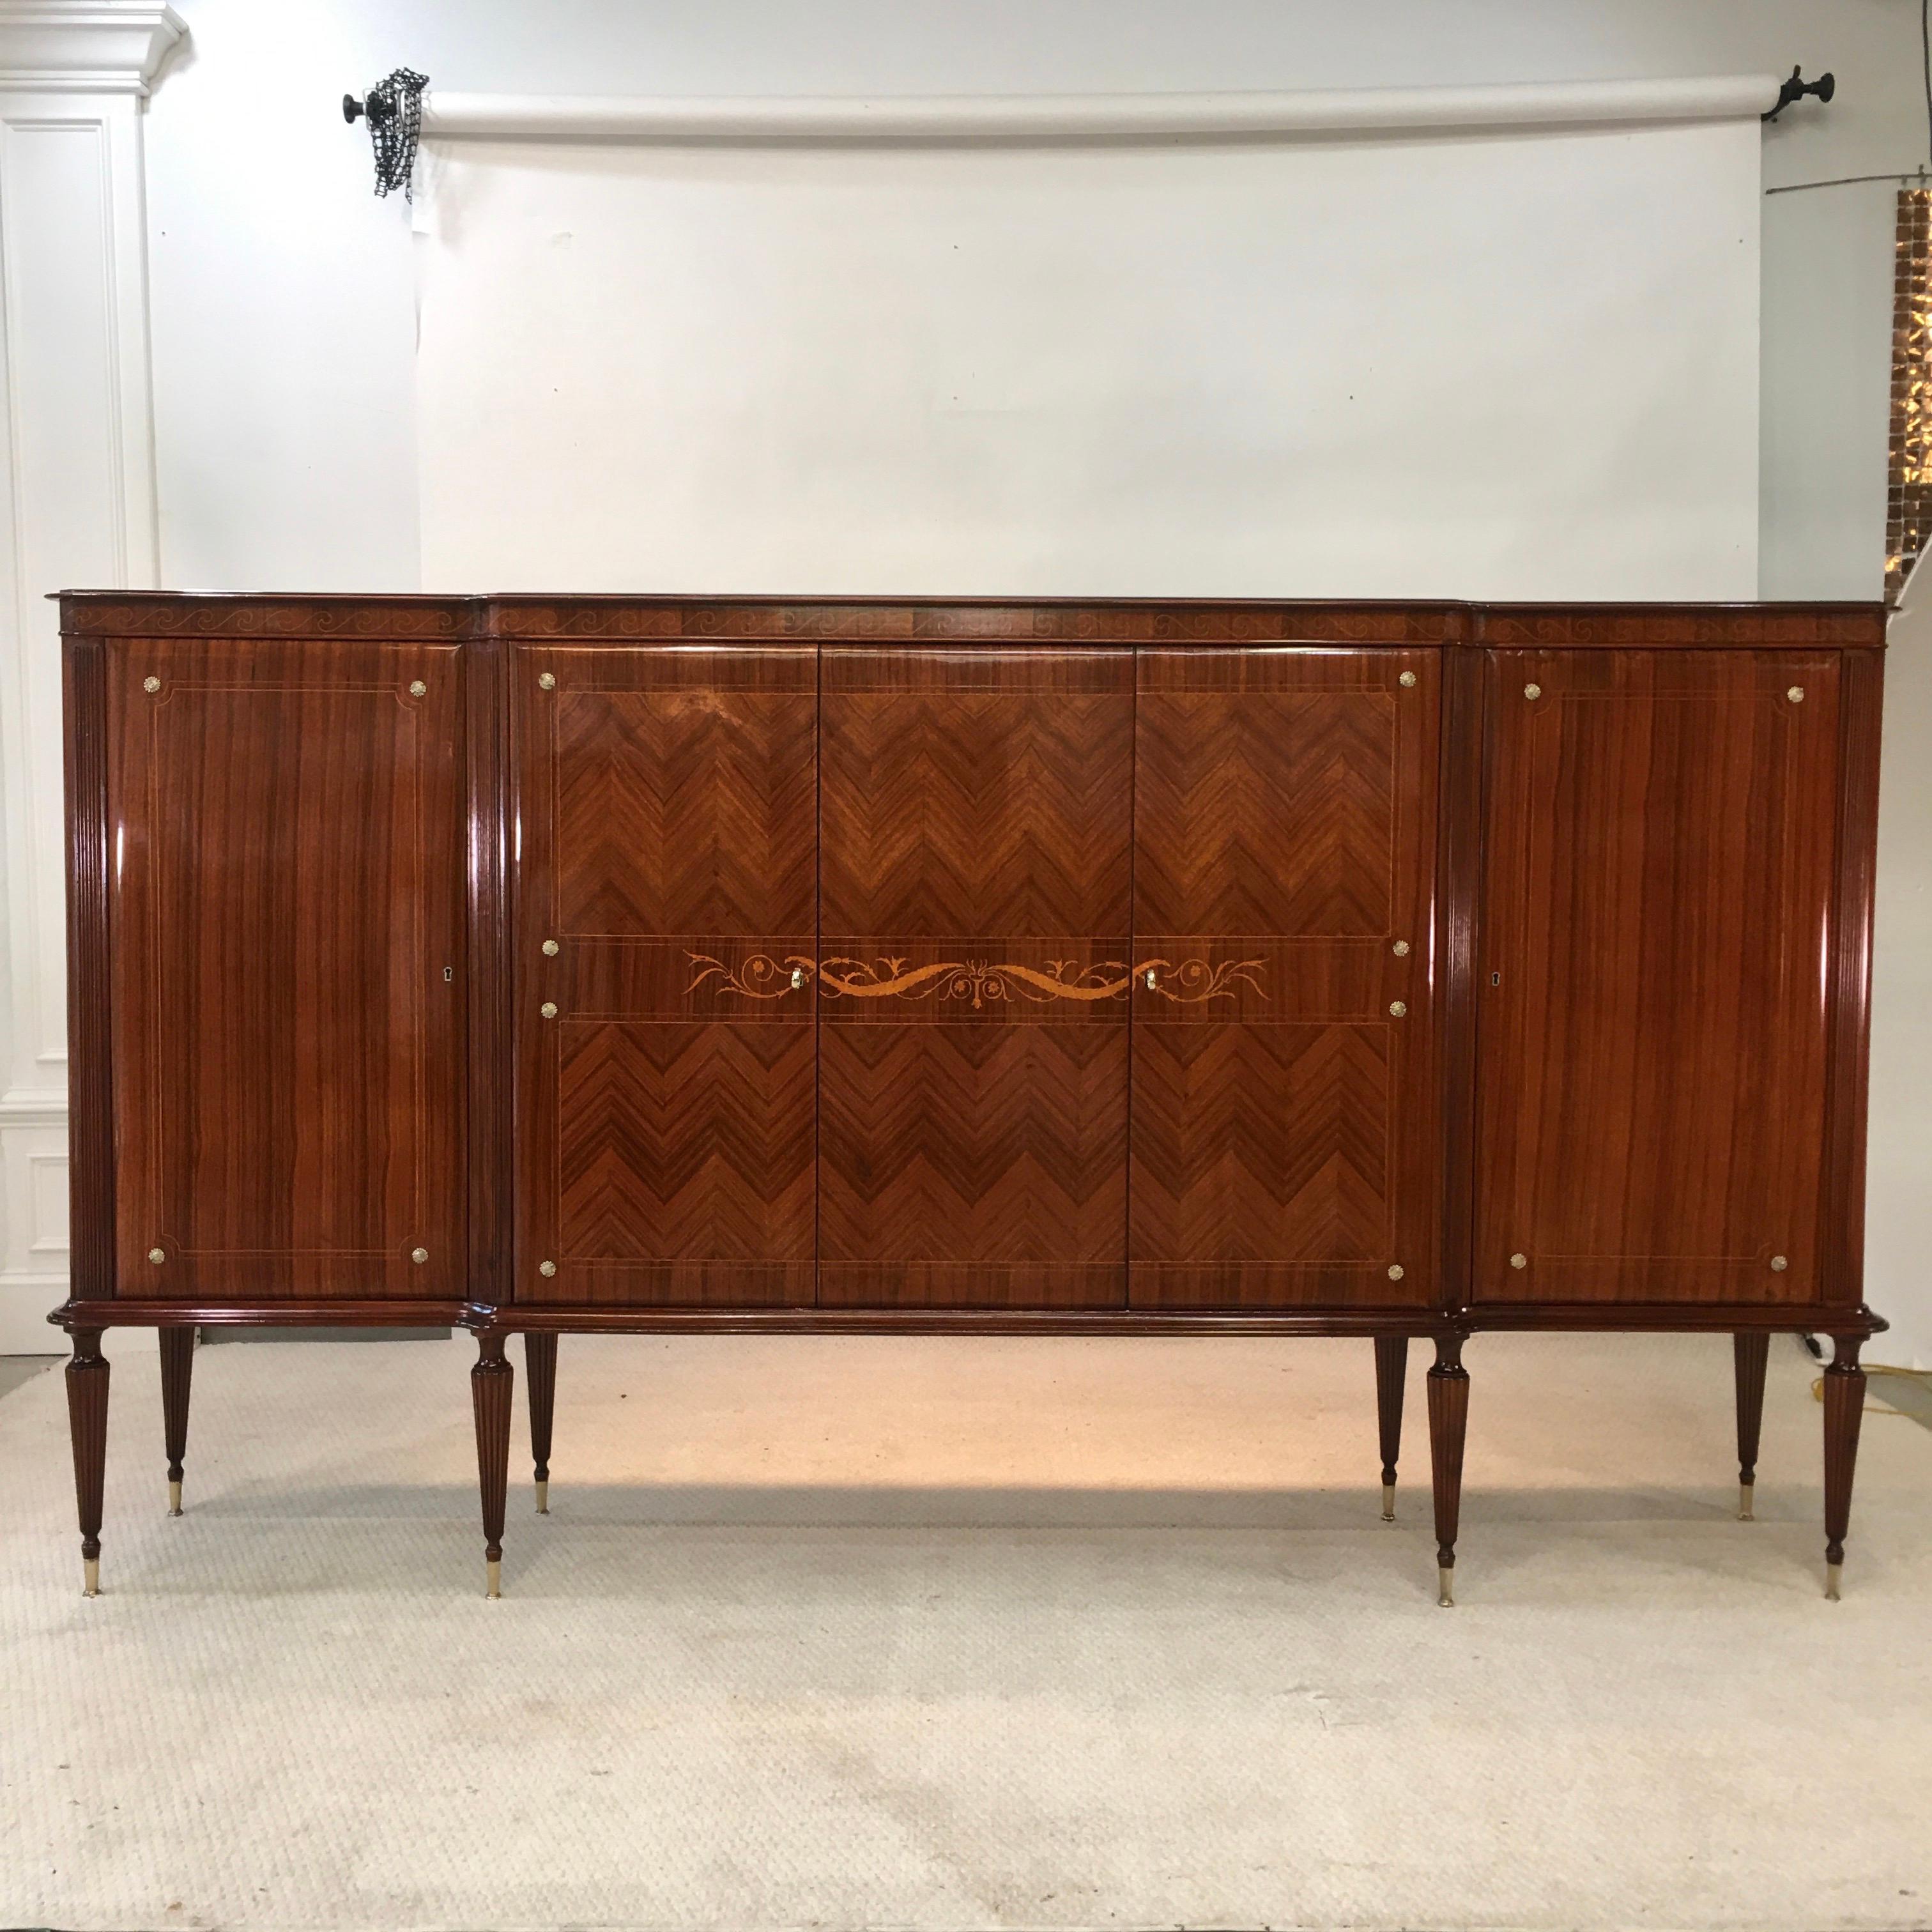 1950's Italian extra large sideboard bar cabinet by Vittorio Dassi in beautifully executed herringbone pattern rosewood and mahogany supported on eight tapered and fluted legs with brass sabots. Distinctive intarsia border in motif of ocean waves.